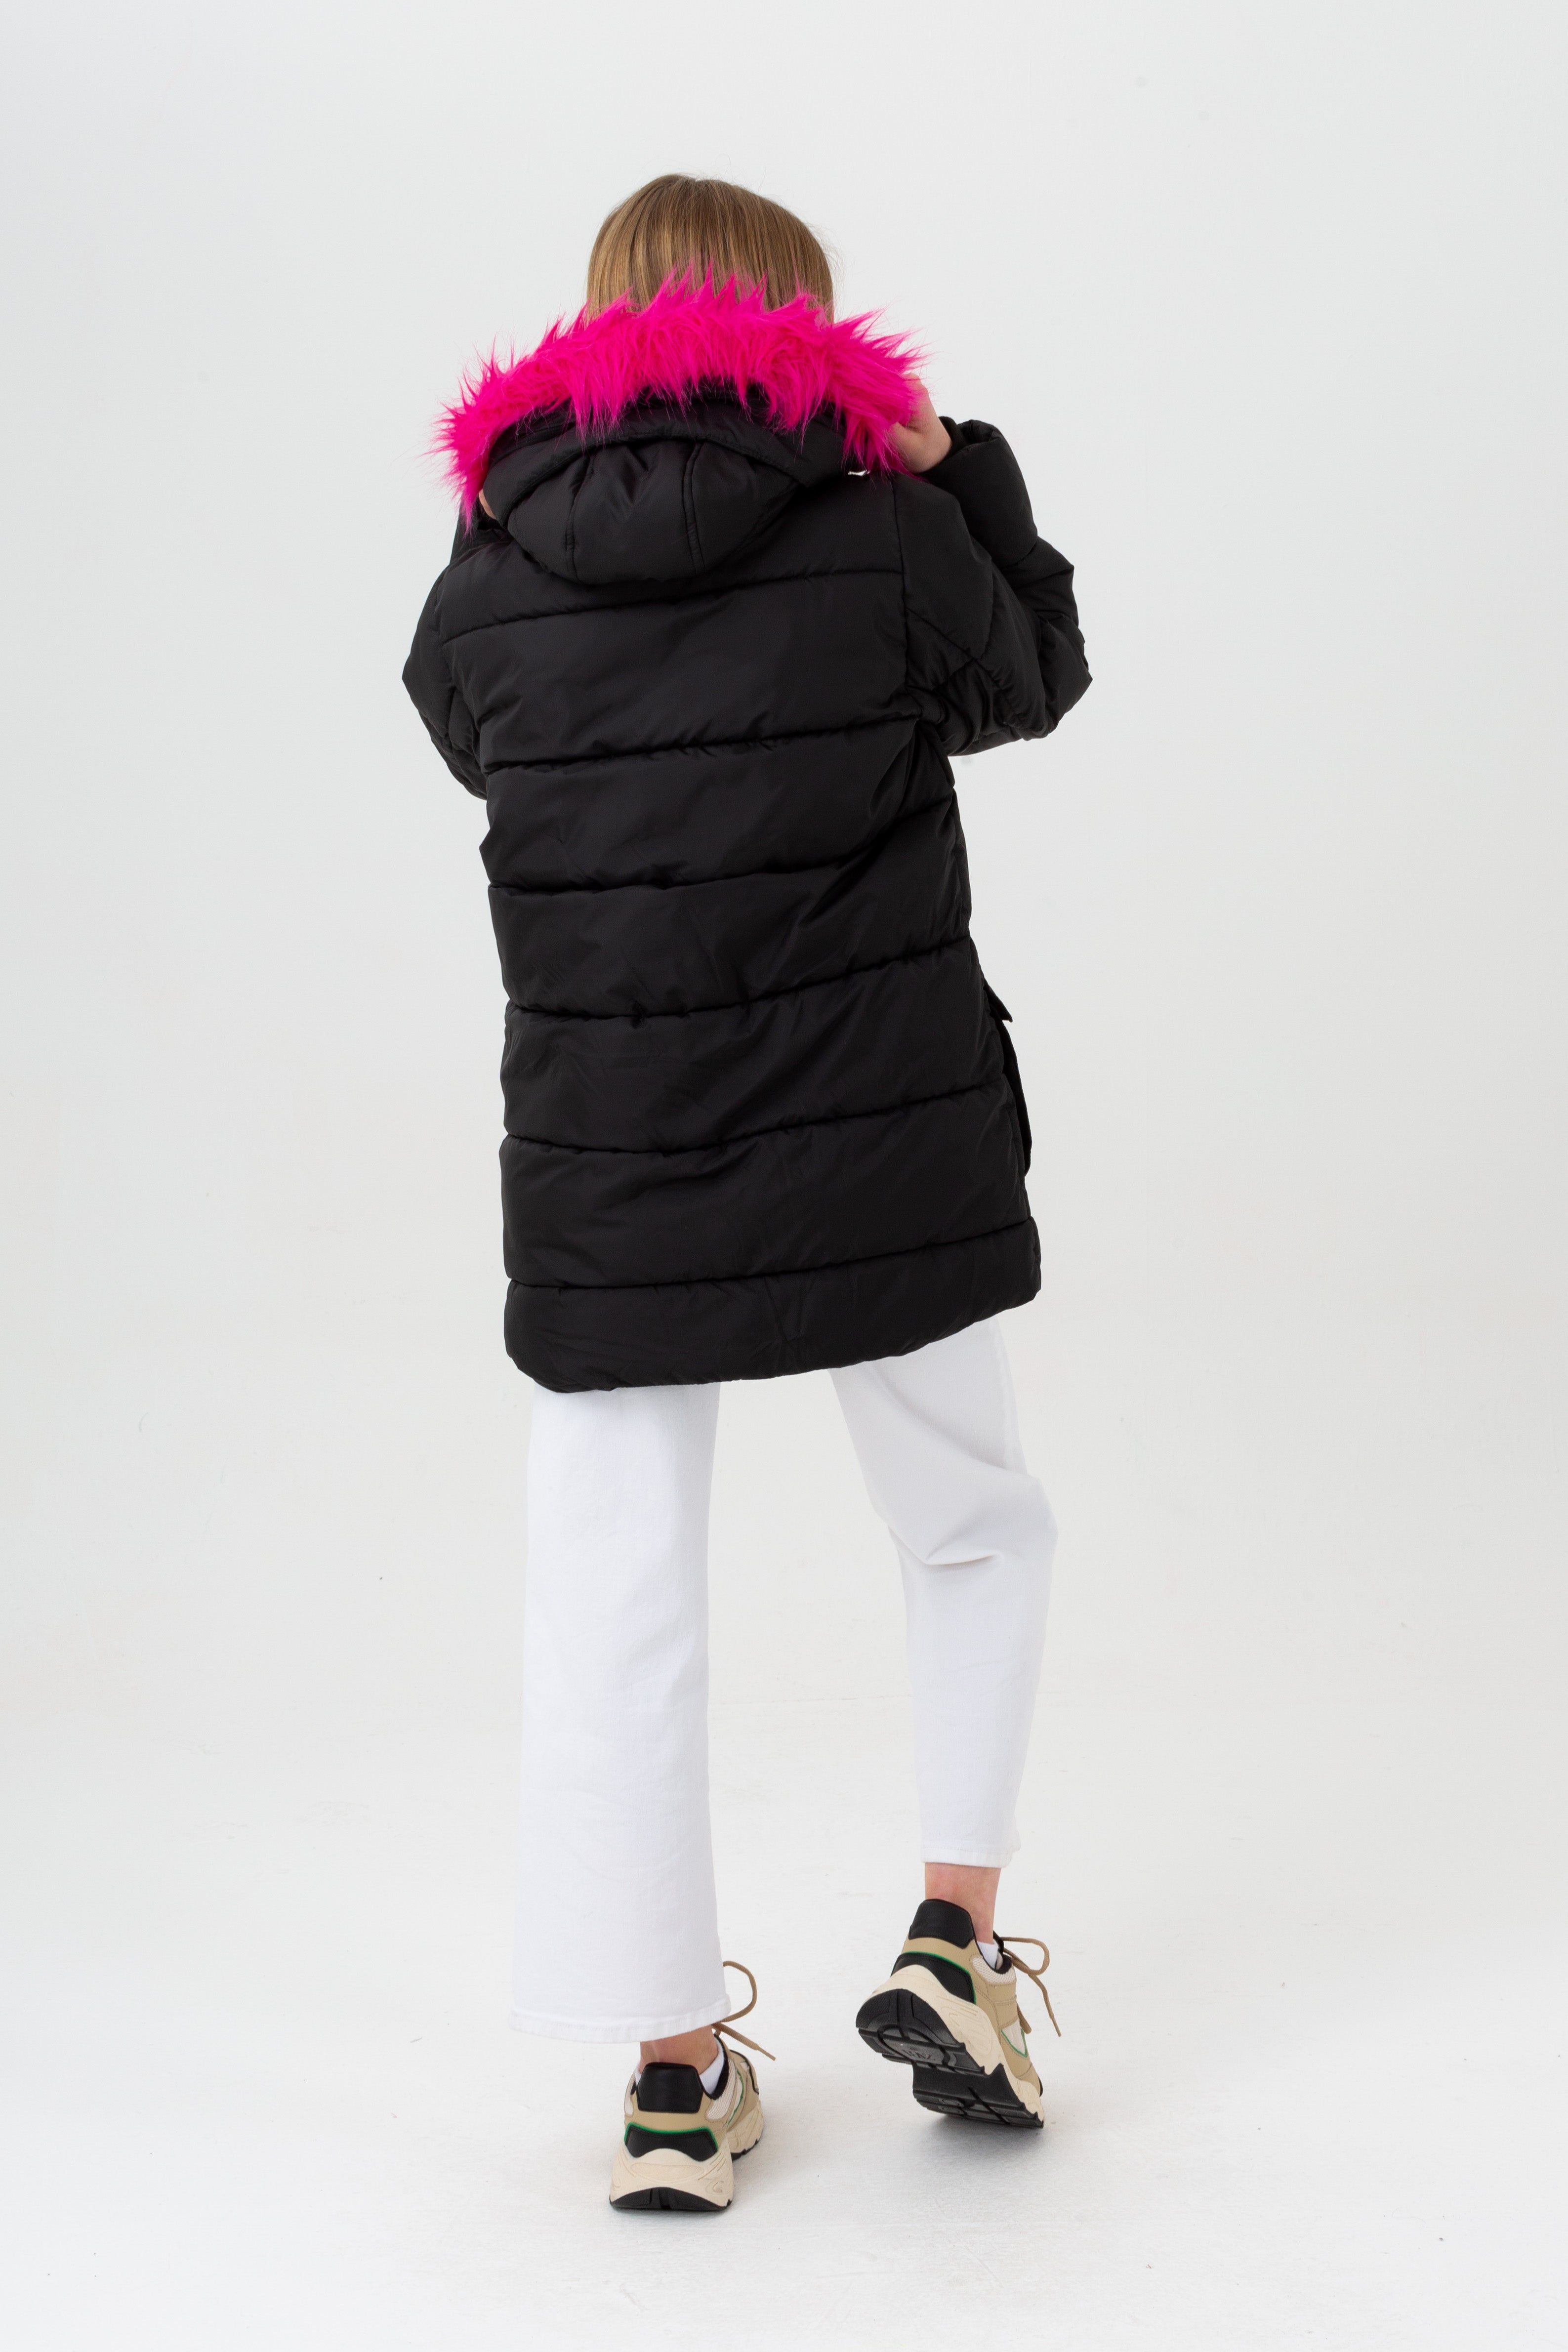 Meet the HYPE. Girls Black Bloom Crest Explorer Jacket, perfect for braving the cold weather this season. Designed in our quilted explorer jacket shape, boasting a pink faux fur hood and embroidered HYPE. Crest. Wear with jeans and a t-shirt or a HYPE. hoodie and matching joggers for the ultimate comfortable fit.